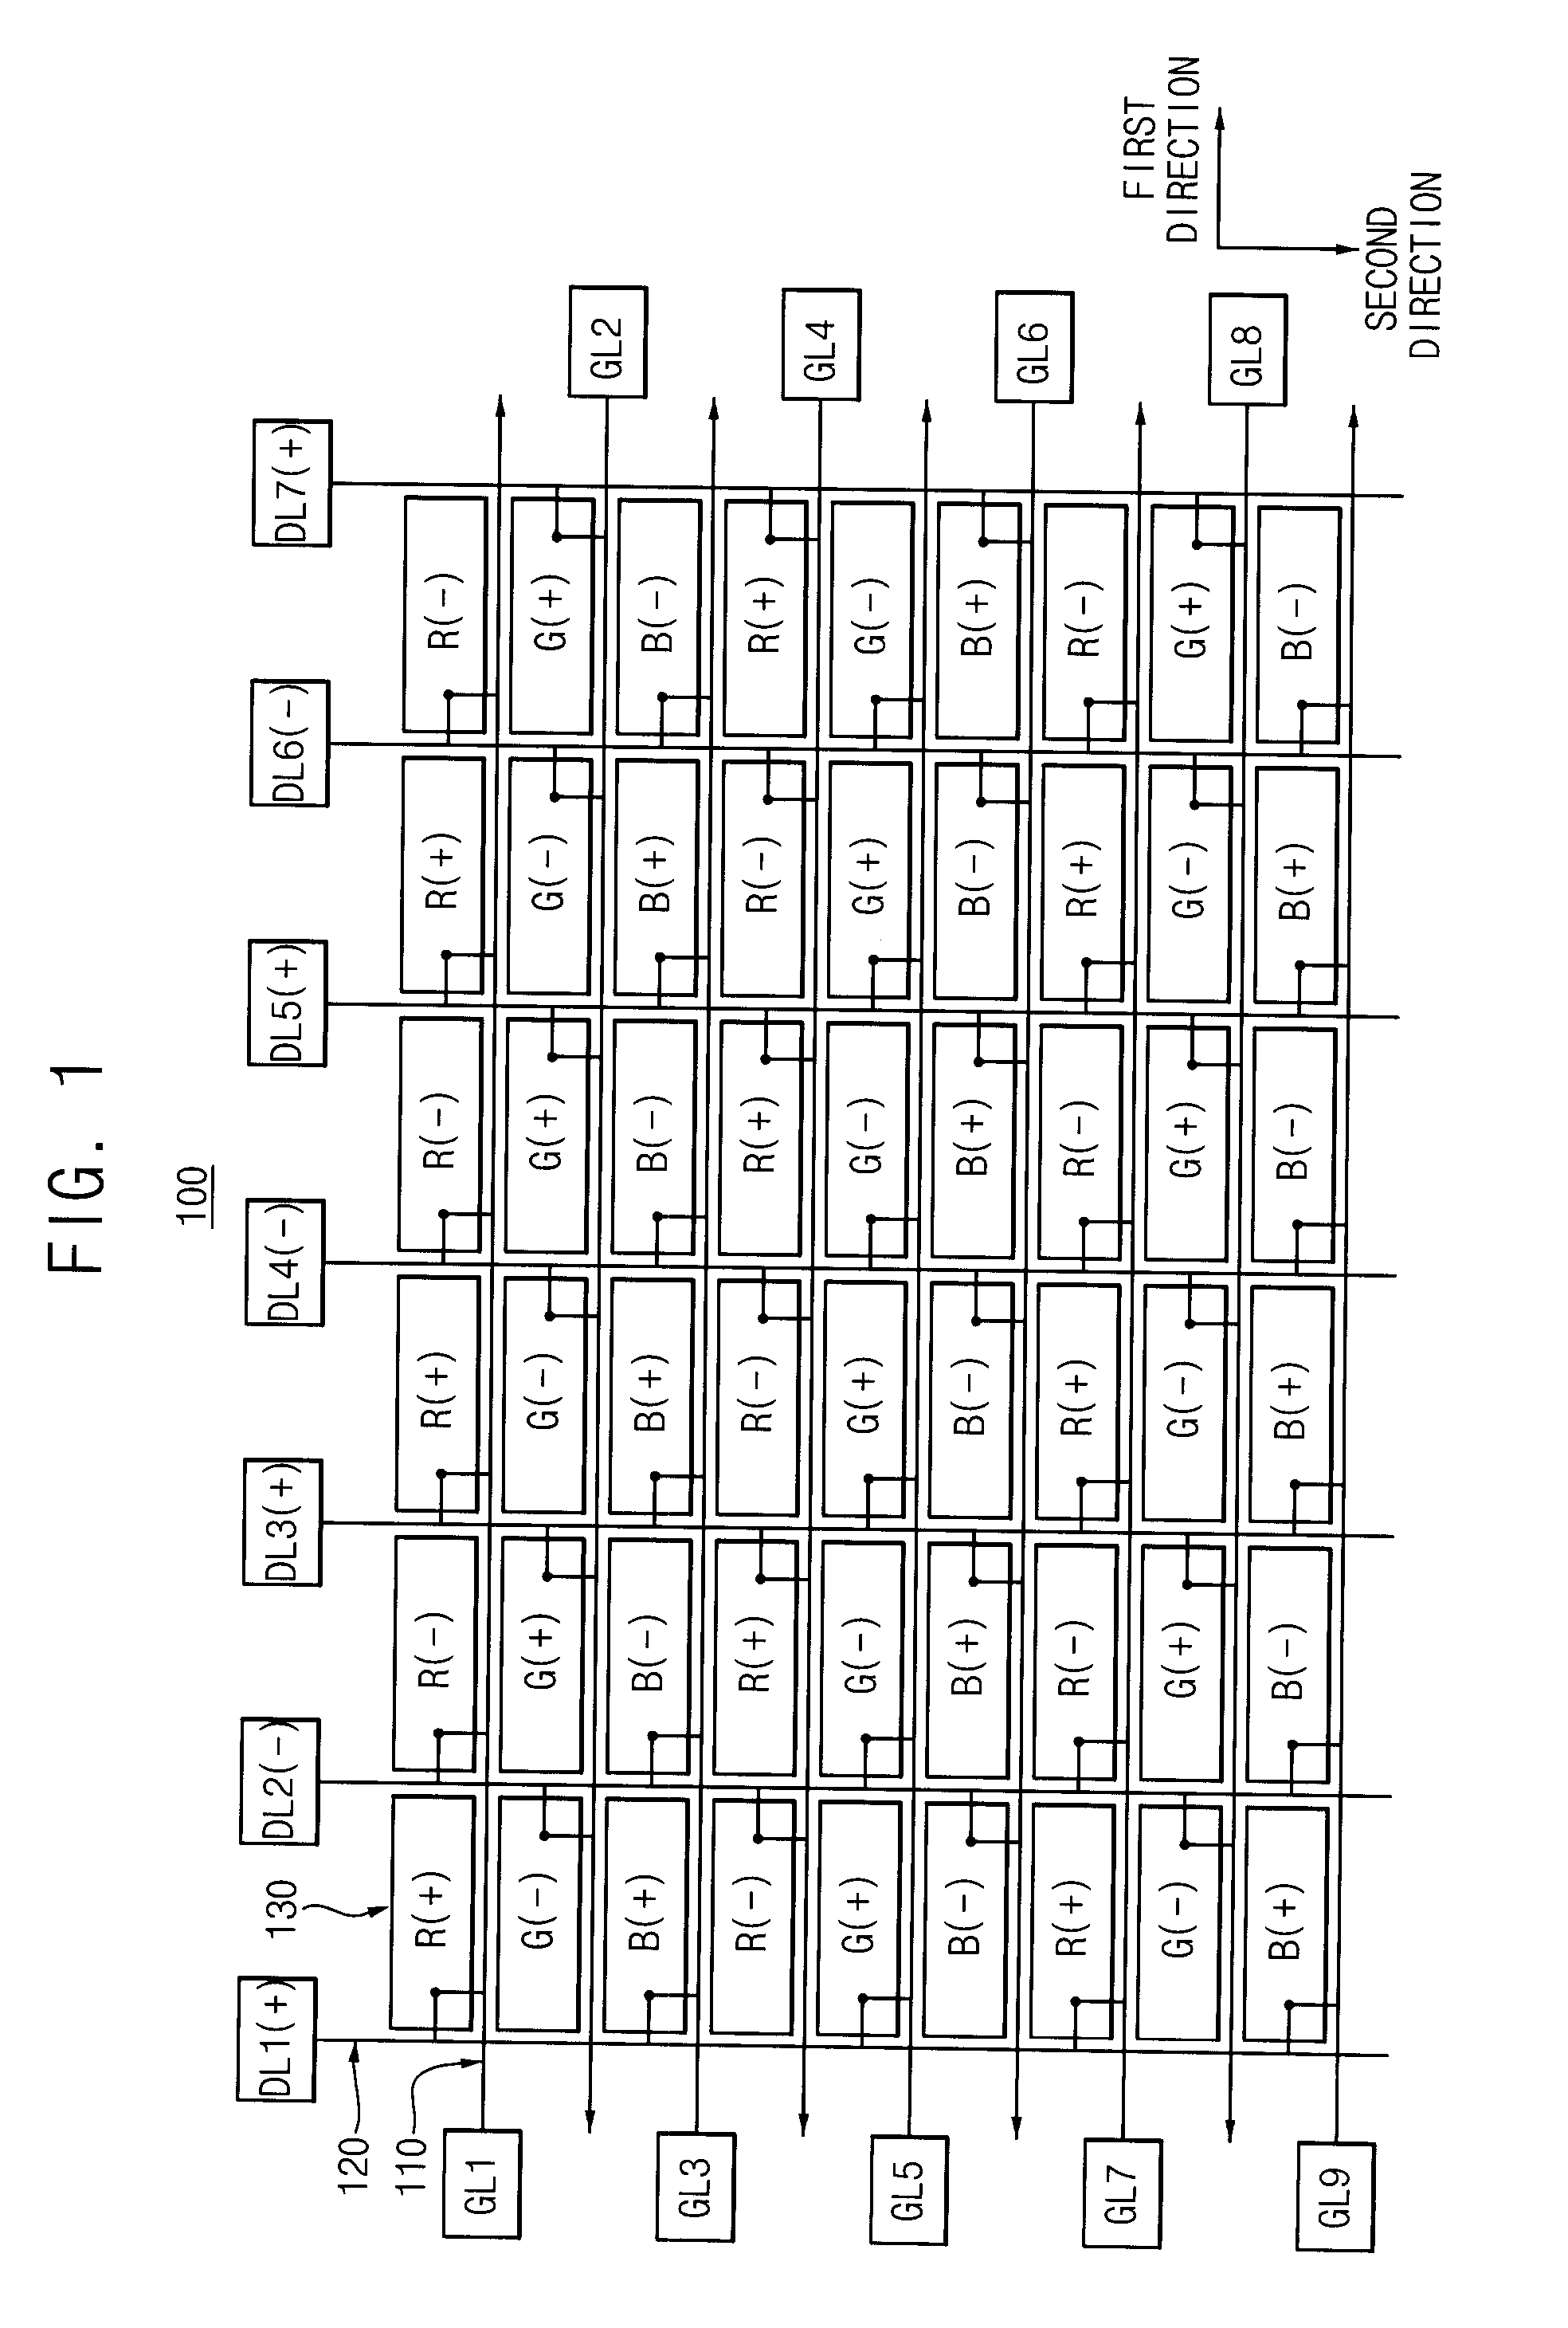 Array substrate and method for manufacturing the same